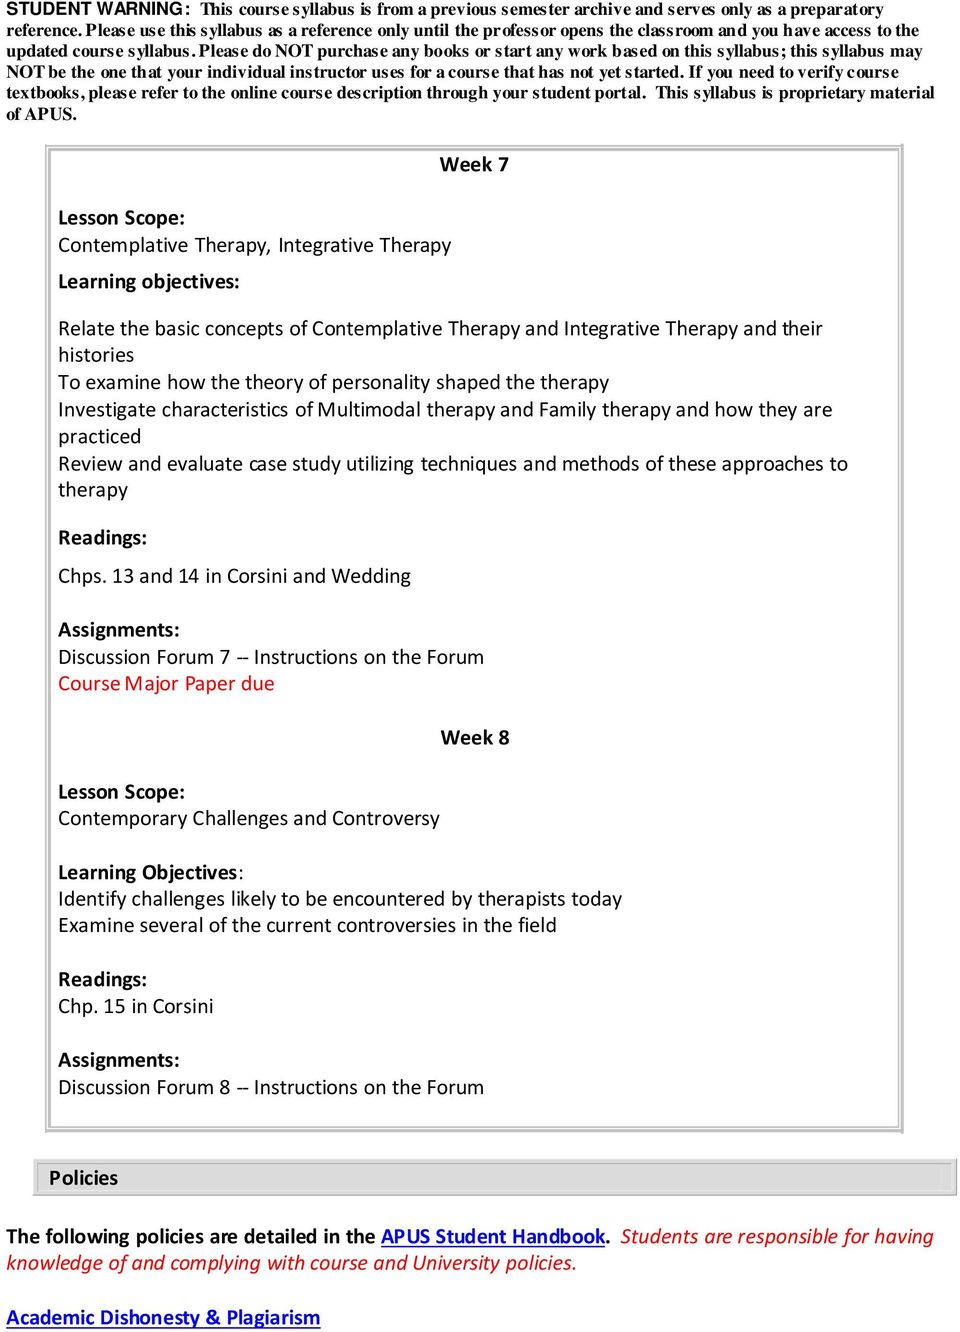 13 and 14 in Corsini and Wedding Discussion Forum 7 -- Instructions on the Forum Course Major Paper due Contemporary Challenges and Controversy Week 8 Learning Objectives: Identify challenges likely